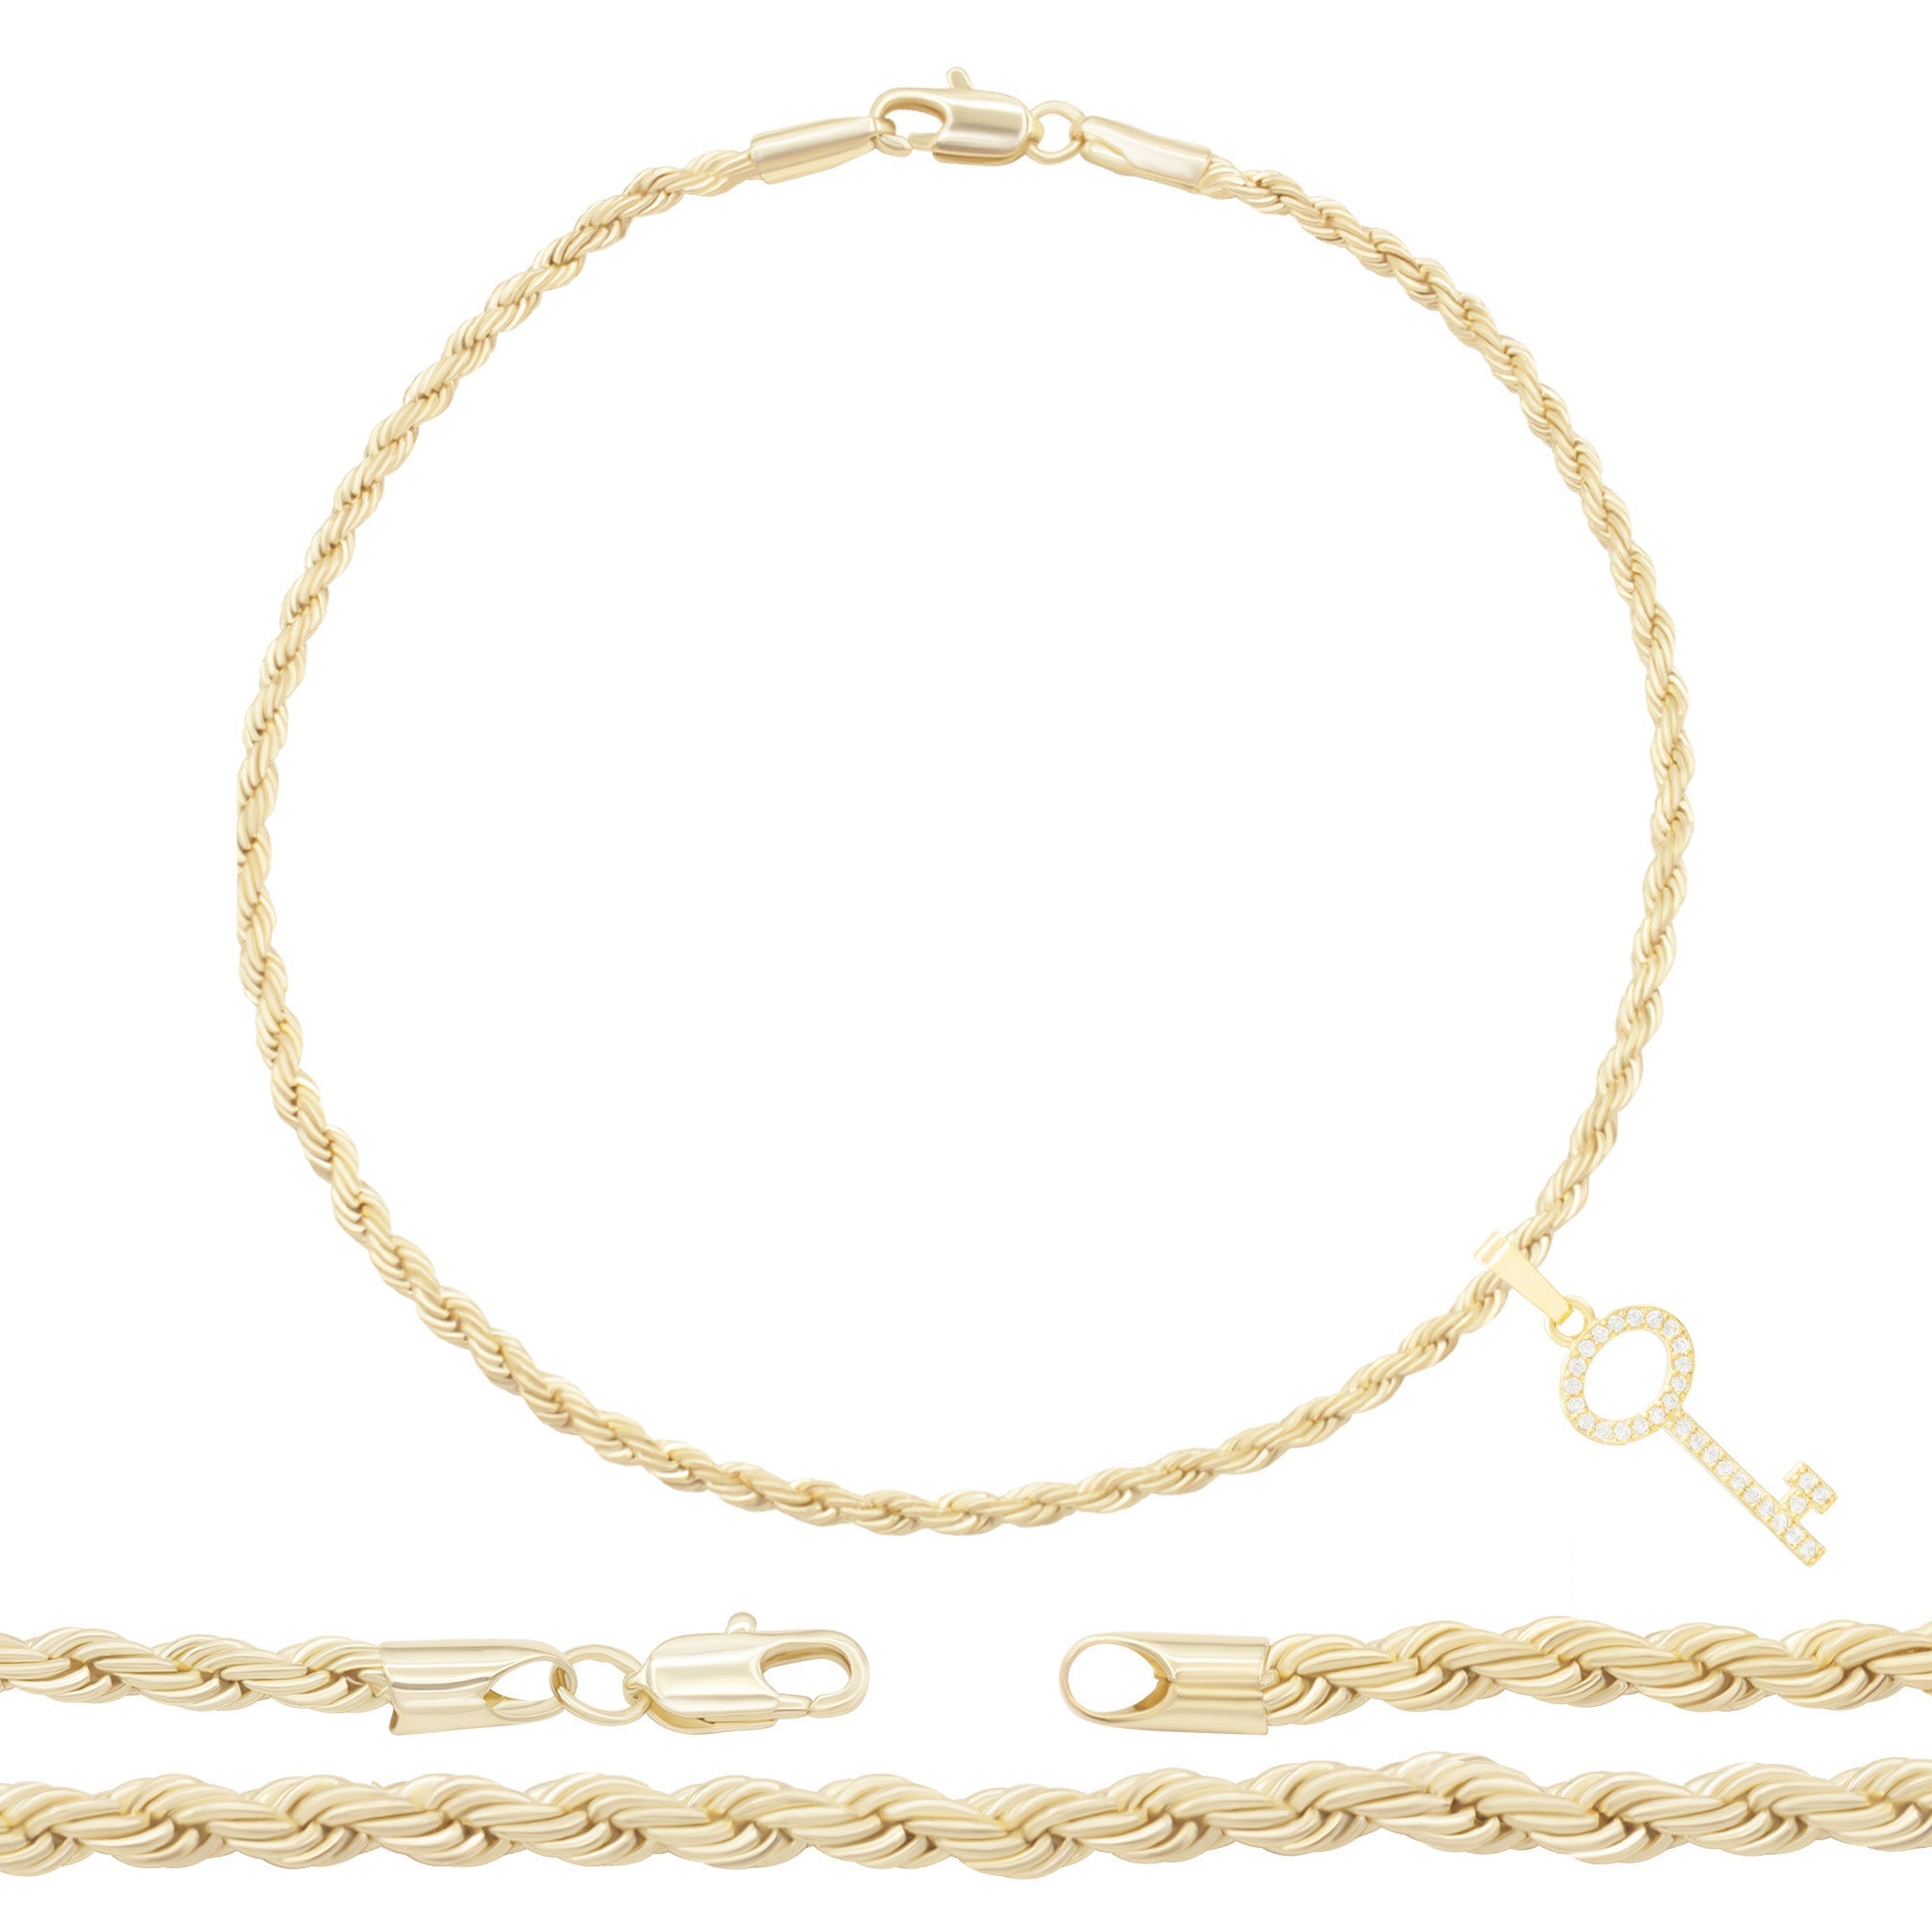 Key Pendant 14K Anklet Gold Filled Cubic Zirconia Charm Rope Chain Set 10" Women Jewelry